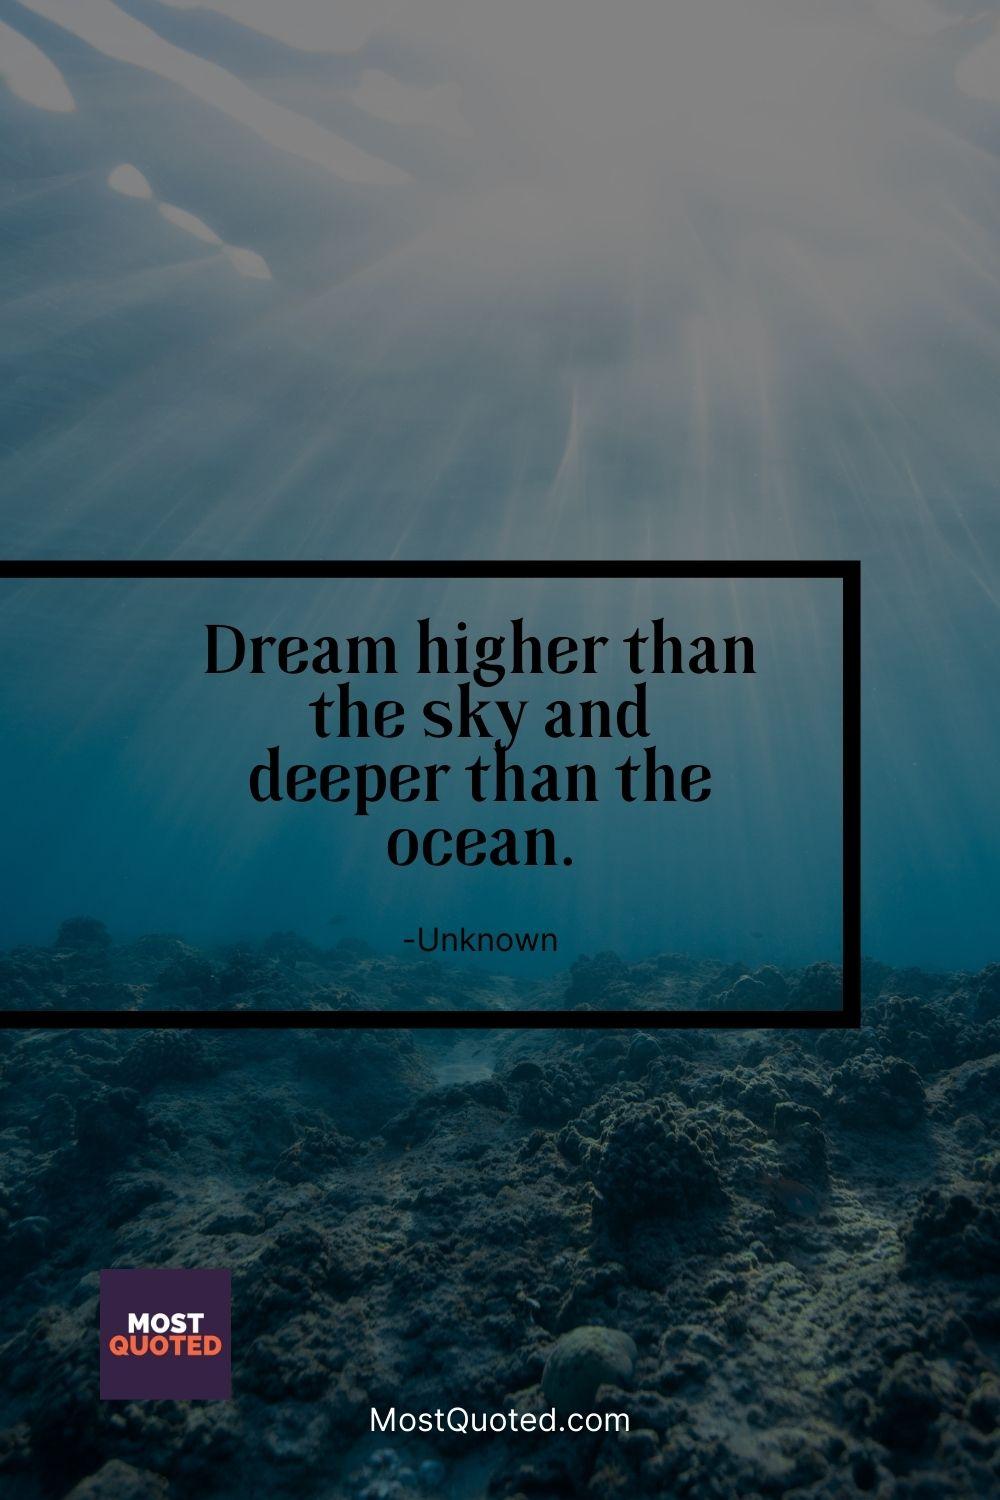 Dream higher than the sky and deeper than the ocean. - Unknown